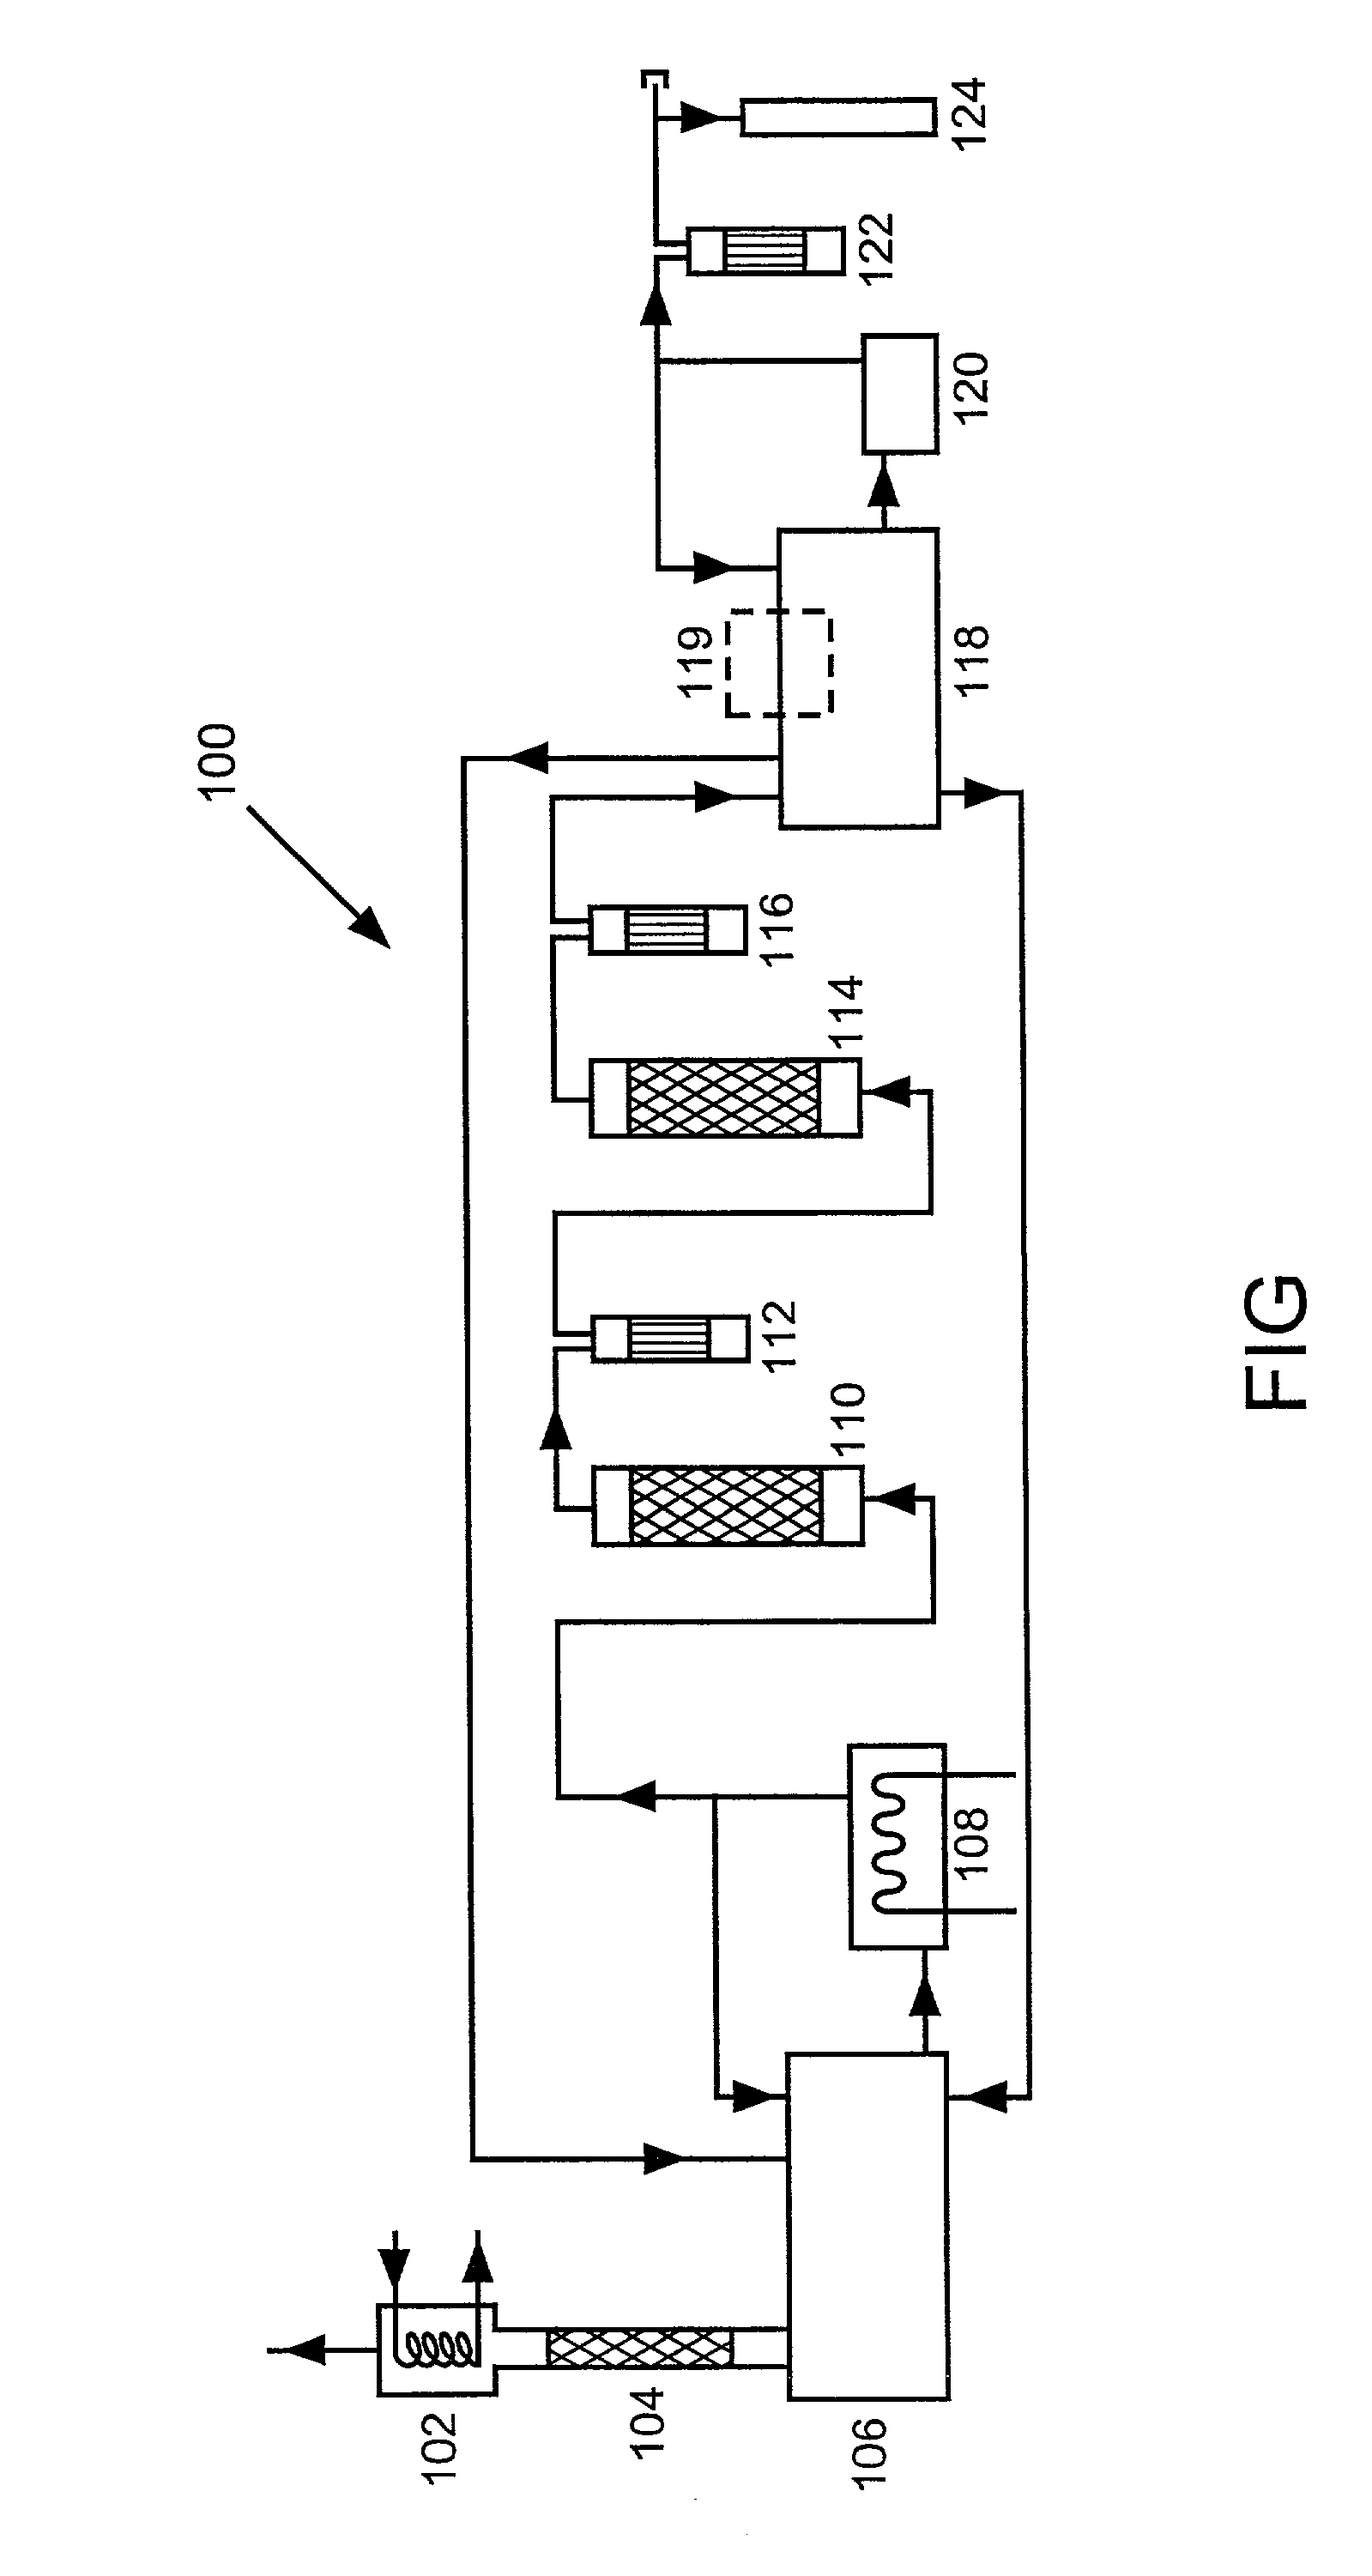 Nitrous oxide purification system and process